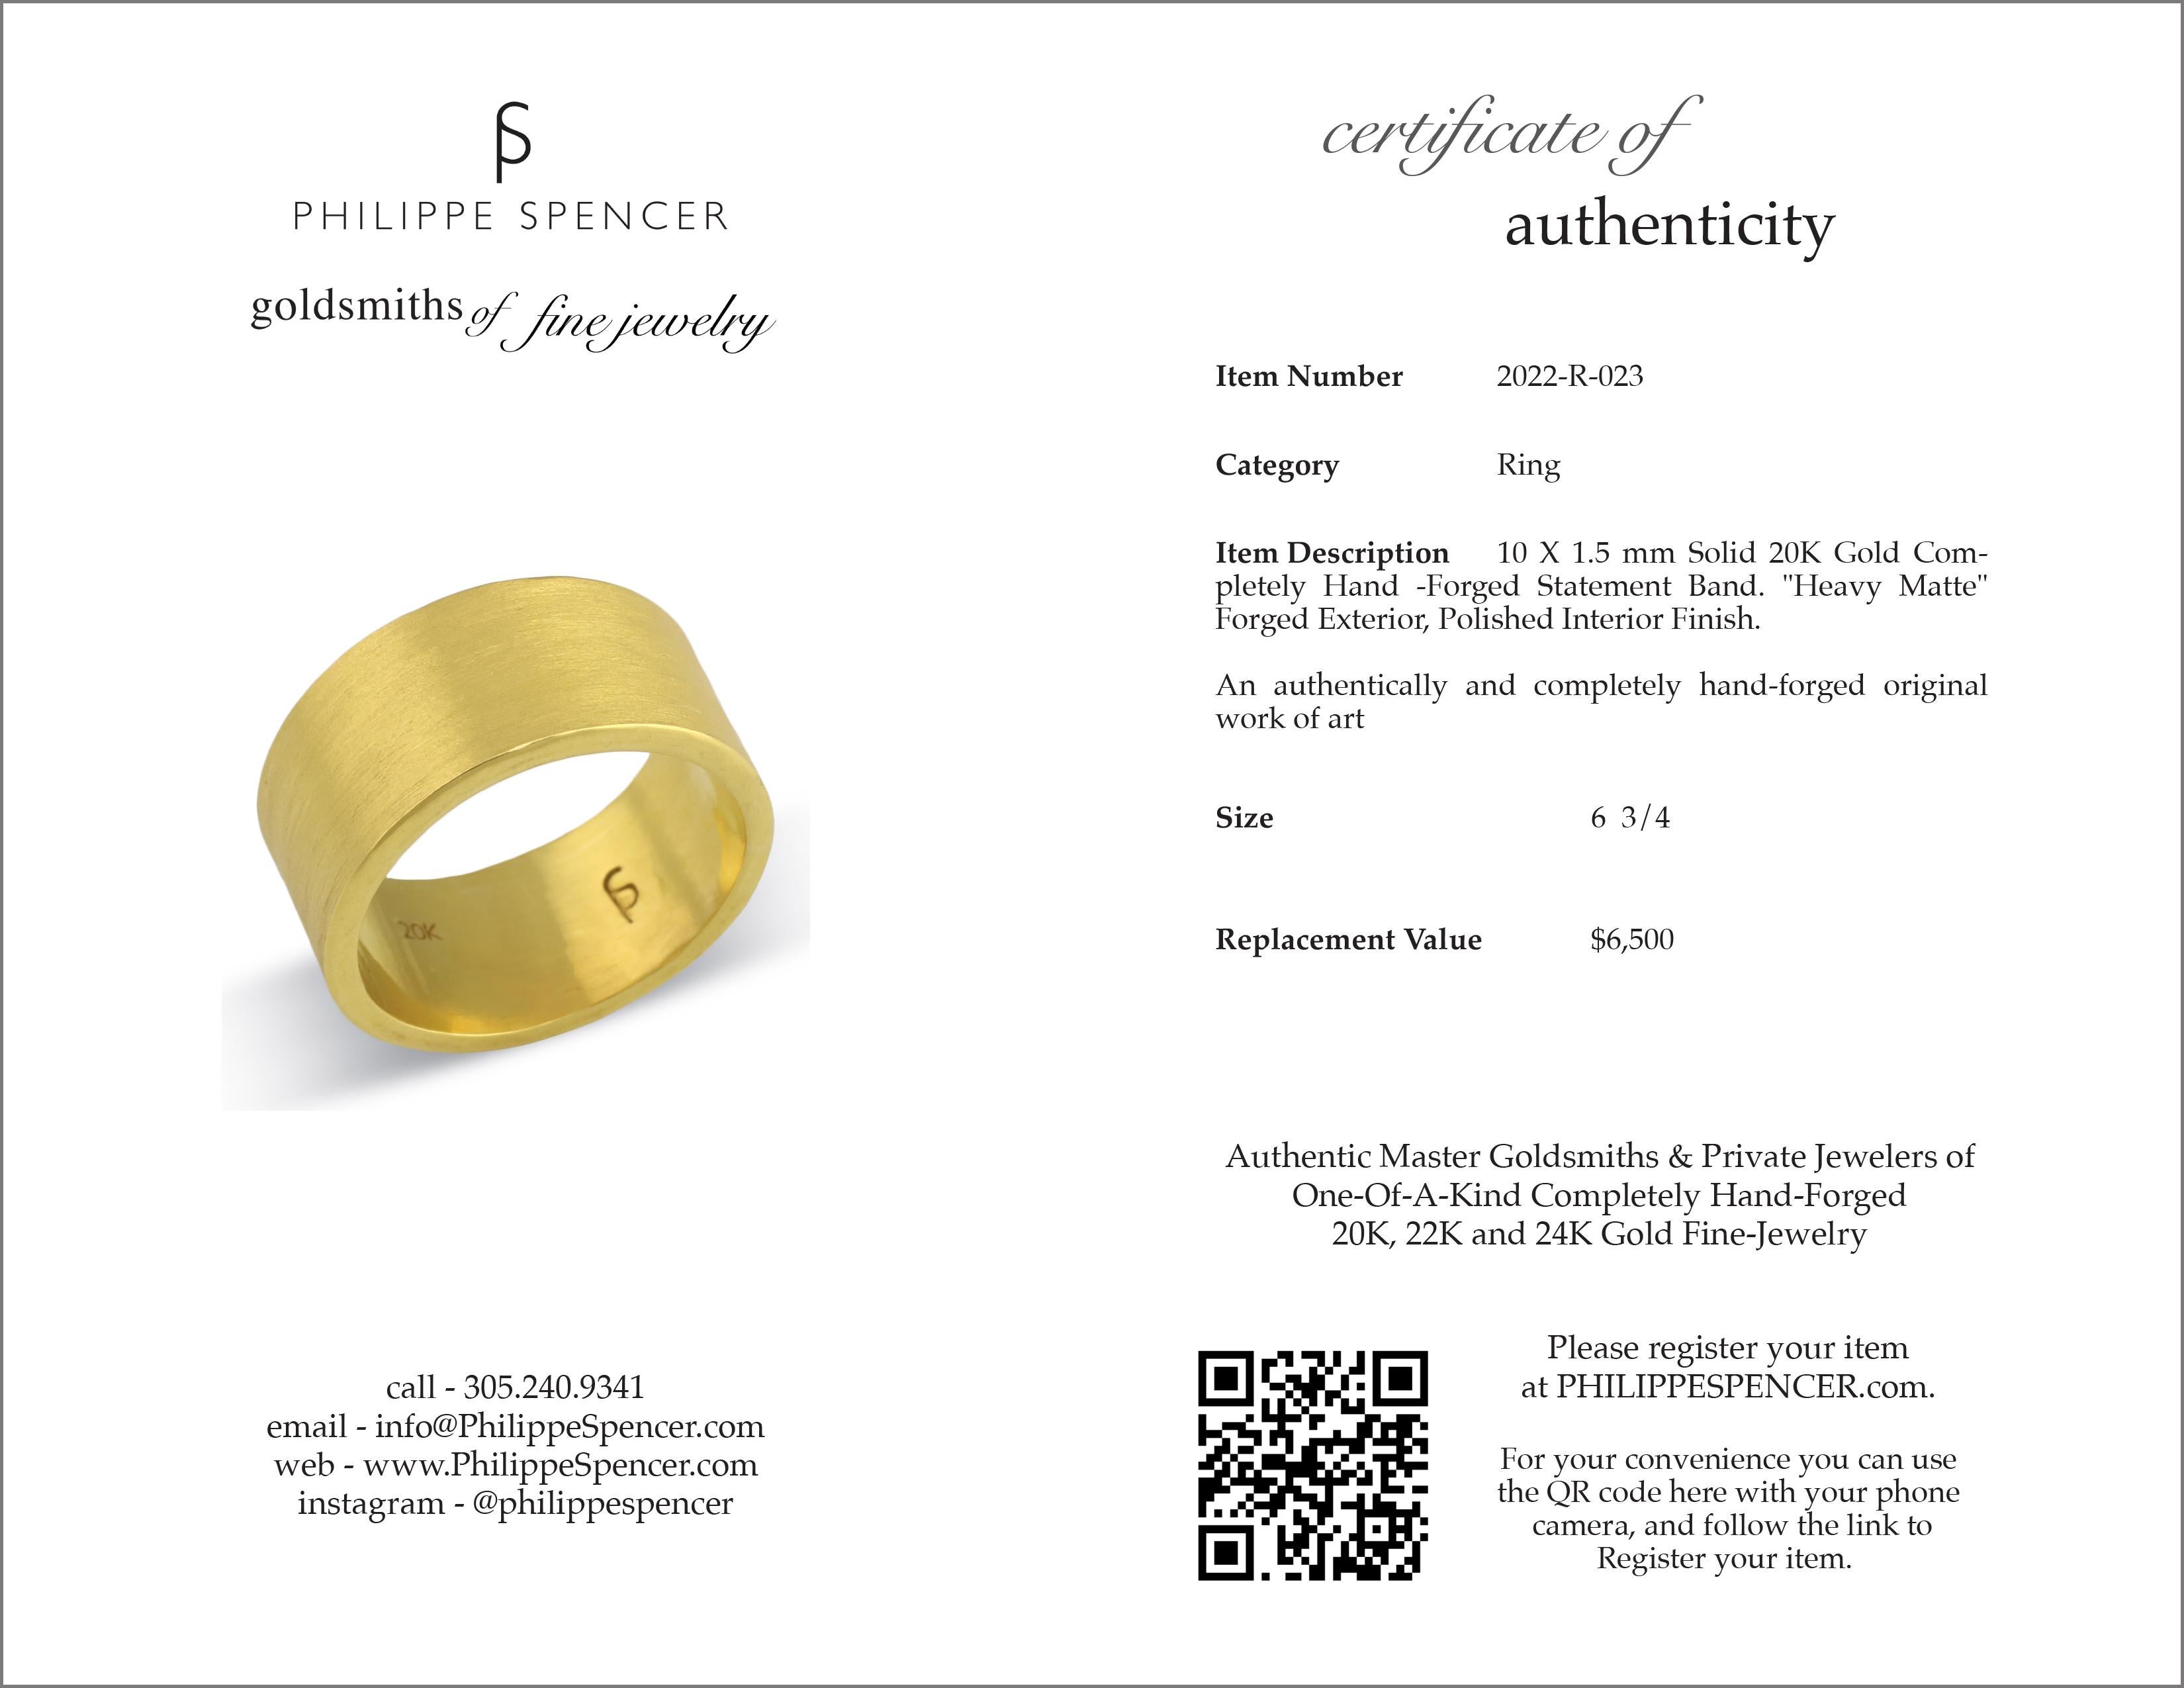 For Sale:  PHILIPPE SPENCER 20K Gold Hand & Anvil Forged 10 x 1.5mm Wide Band Ring 4